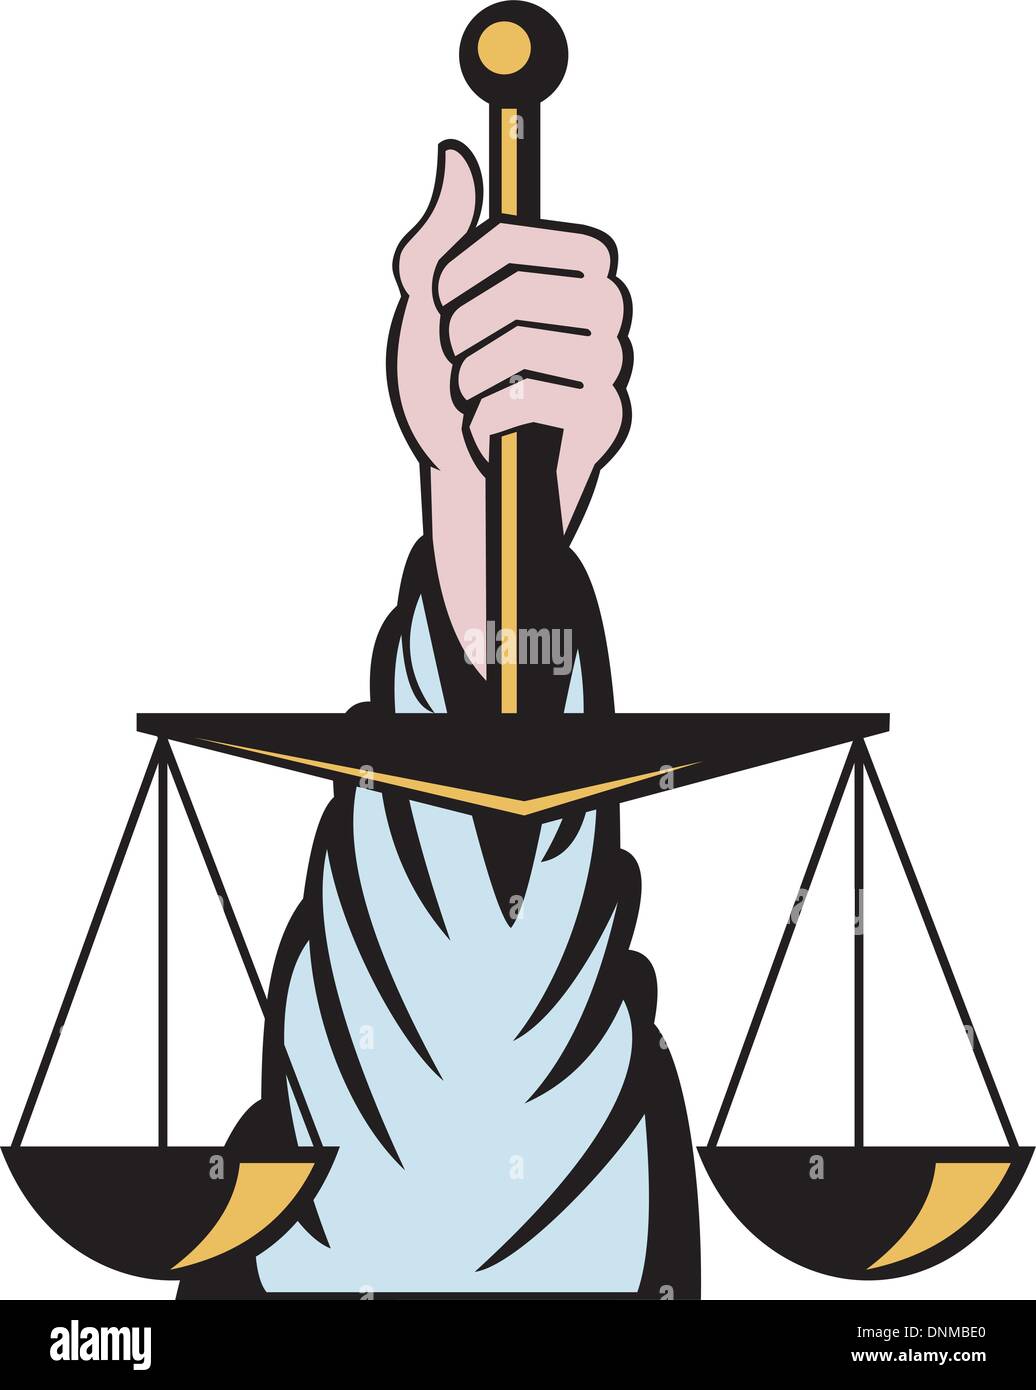 https://c8.alamy.com/comp/DNMBE0/illustration-of-a-hand-holding-scales-of-justice-isolated-on-white-DNMBE0.jpg